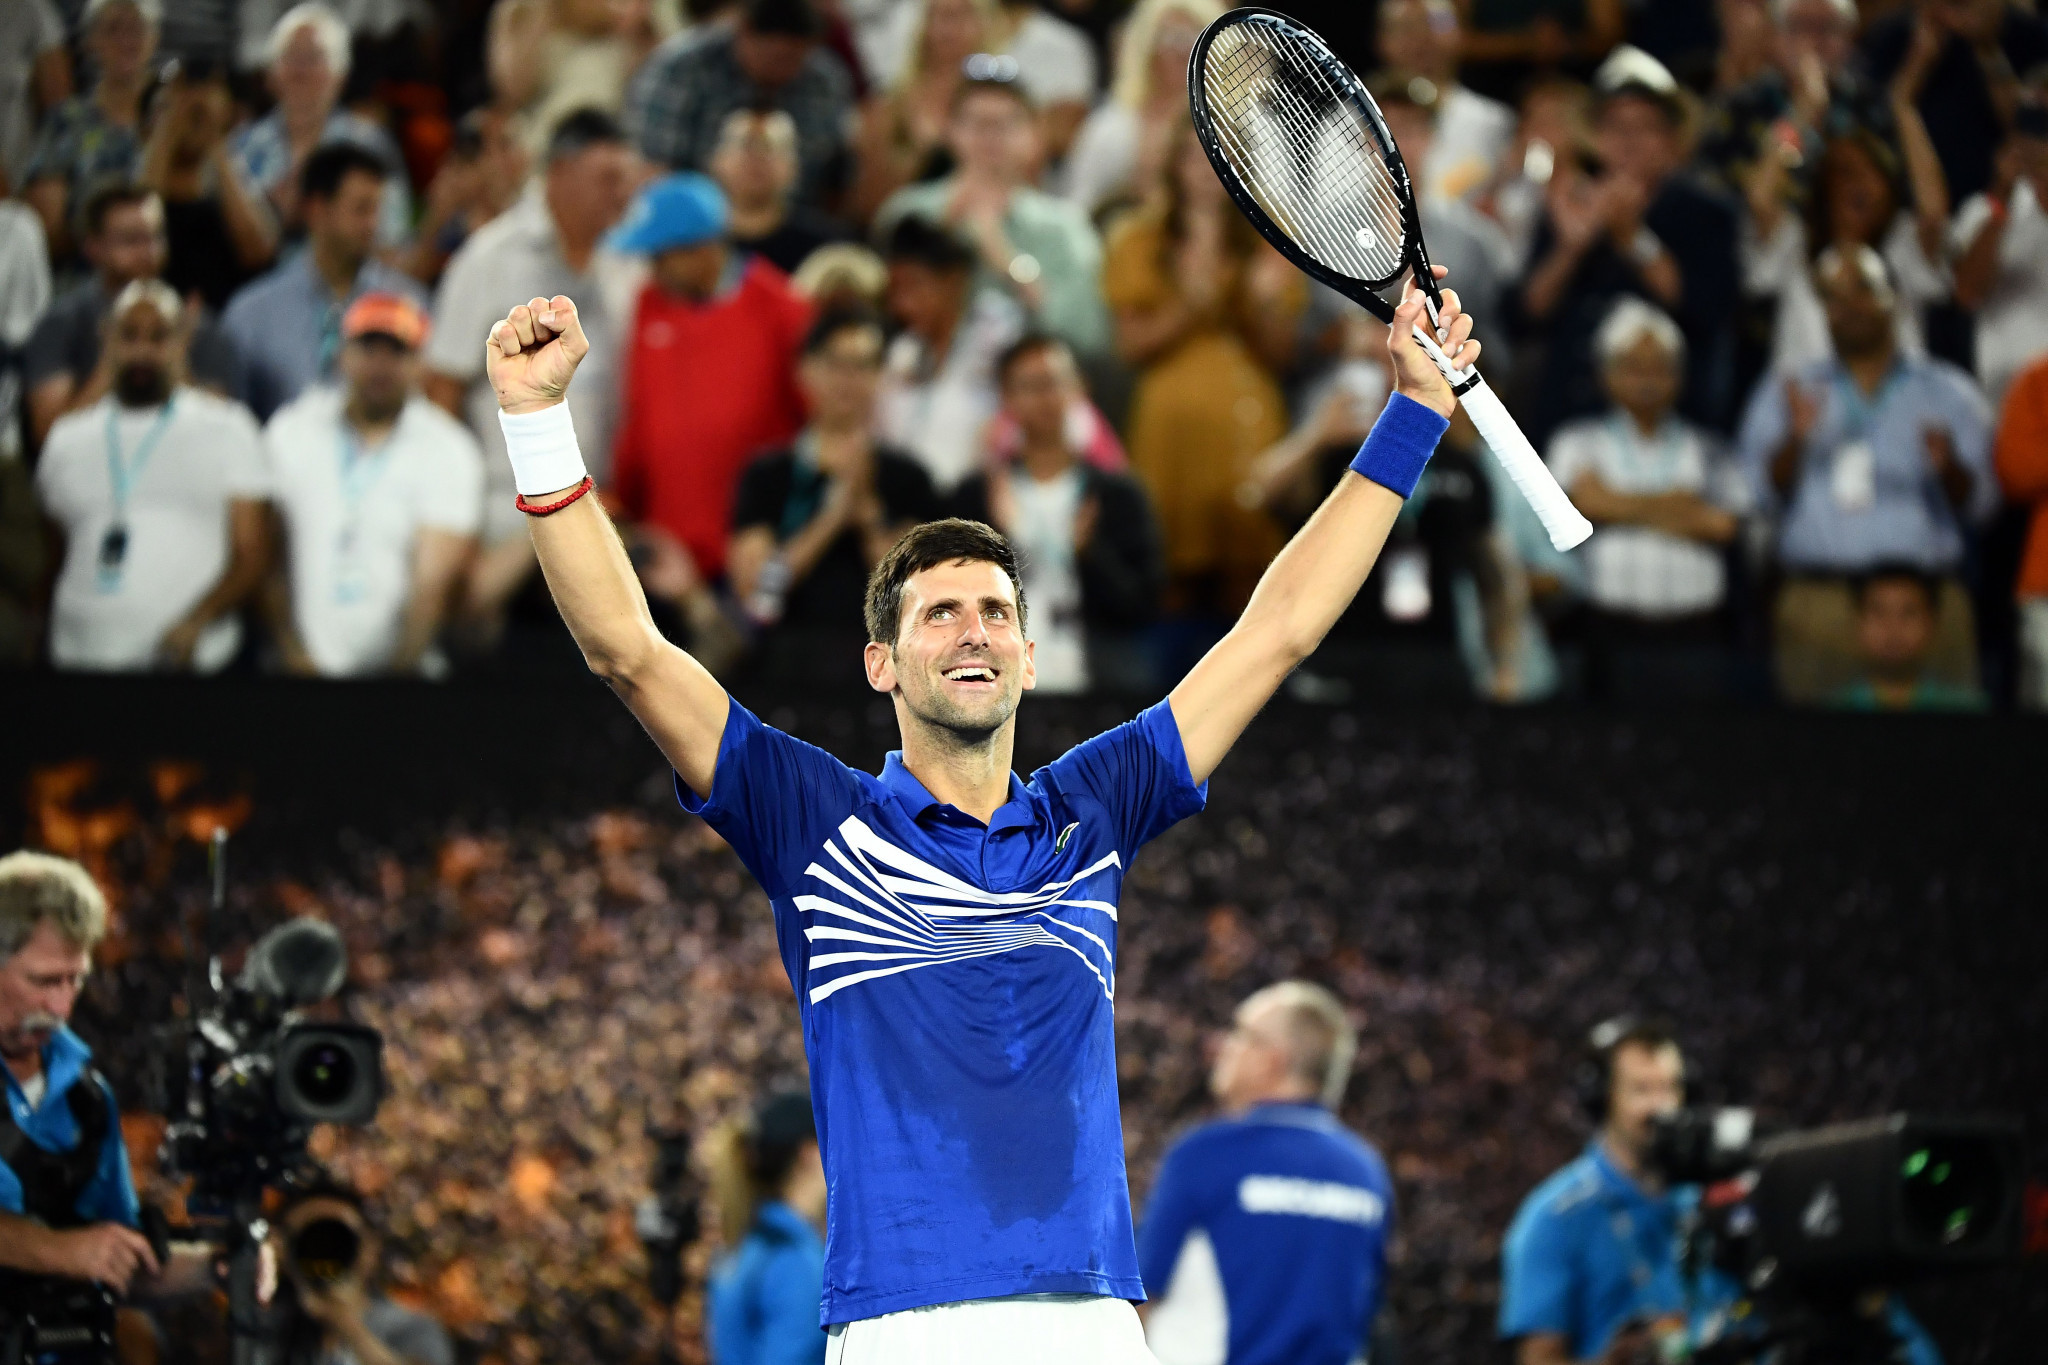 Serbia's Novak Djokovic stormed into the men's singles final at the Australian Open ©Getty Images